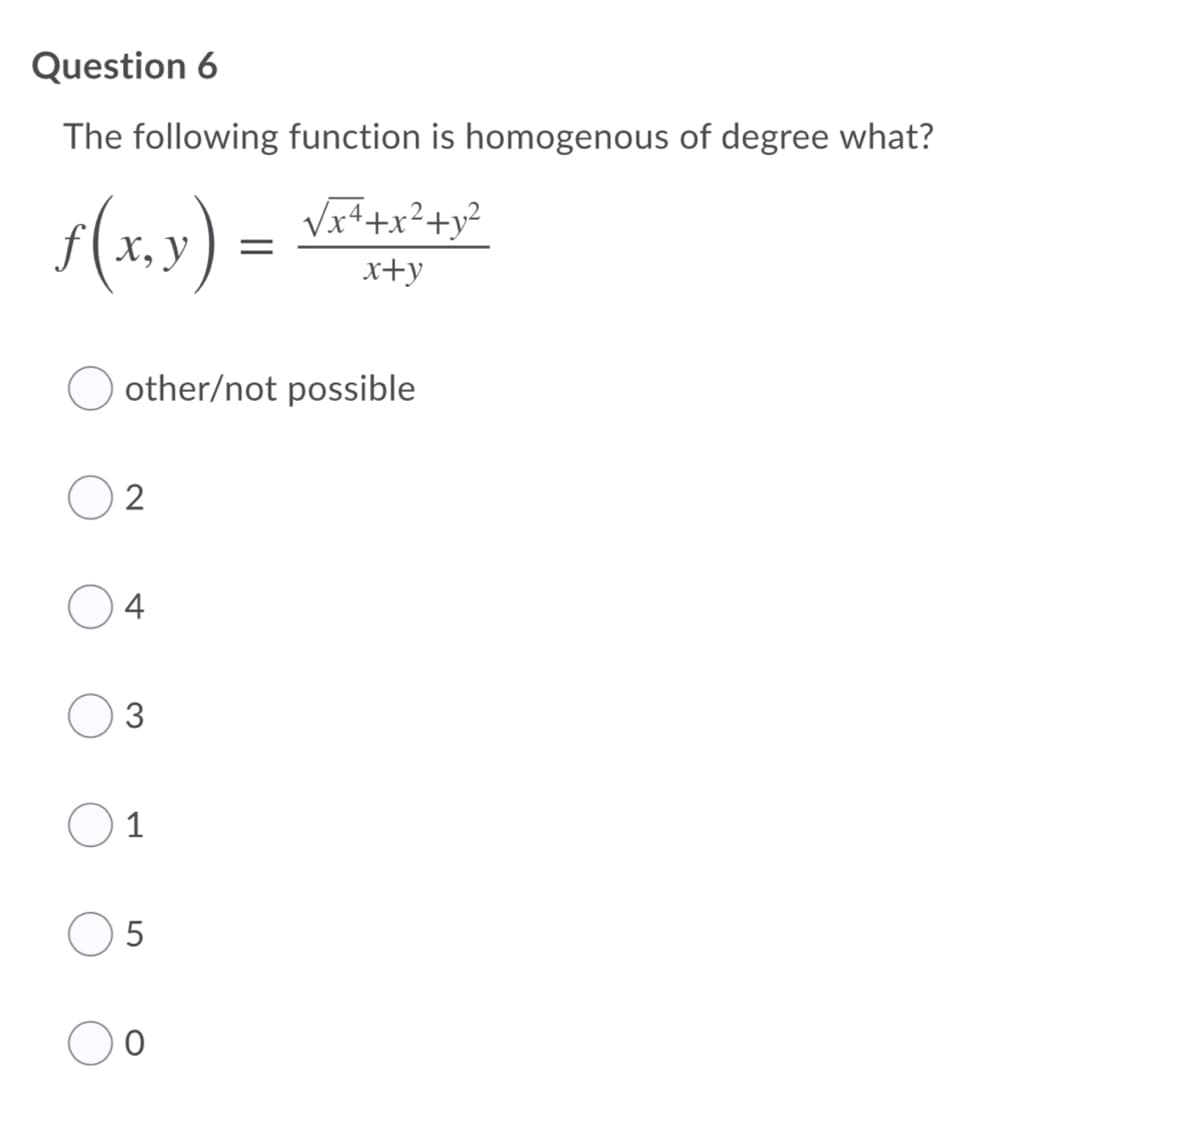 Question 6
The following function is homogenous of degree what?
Vx4+x²+y²
х, у
x+y
O other/not possible
4
3
1
5
